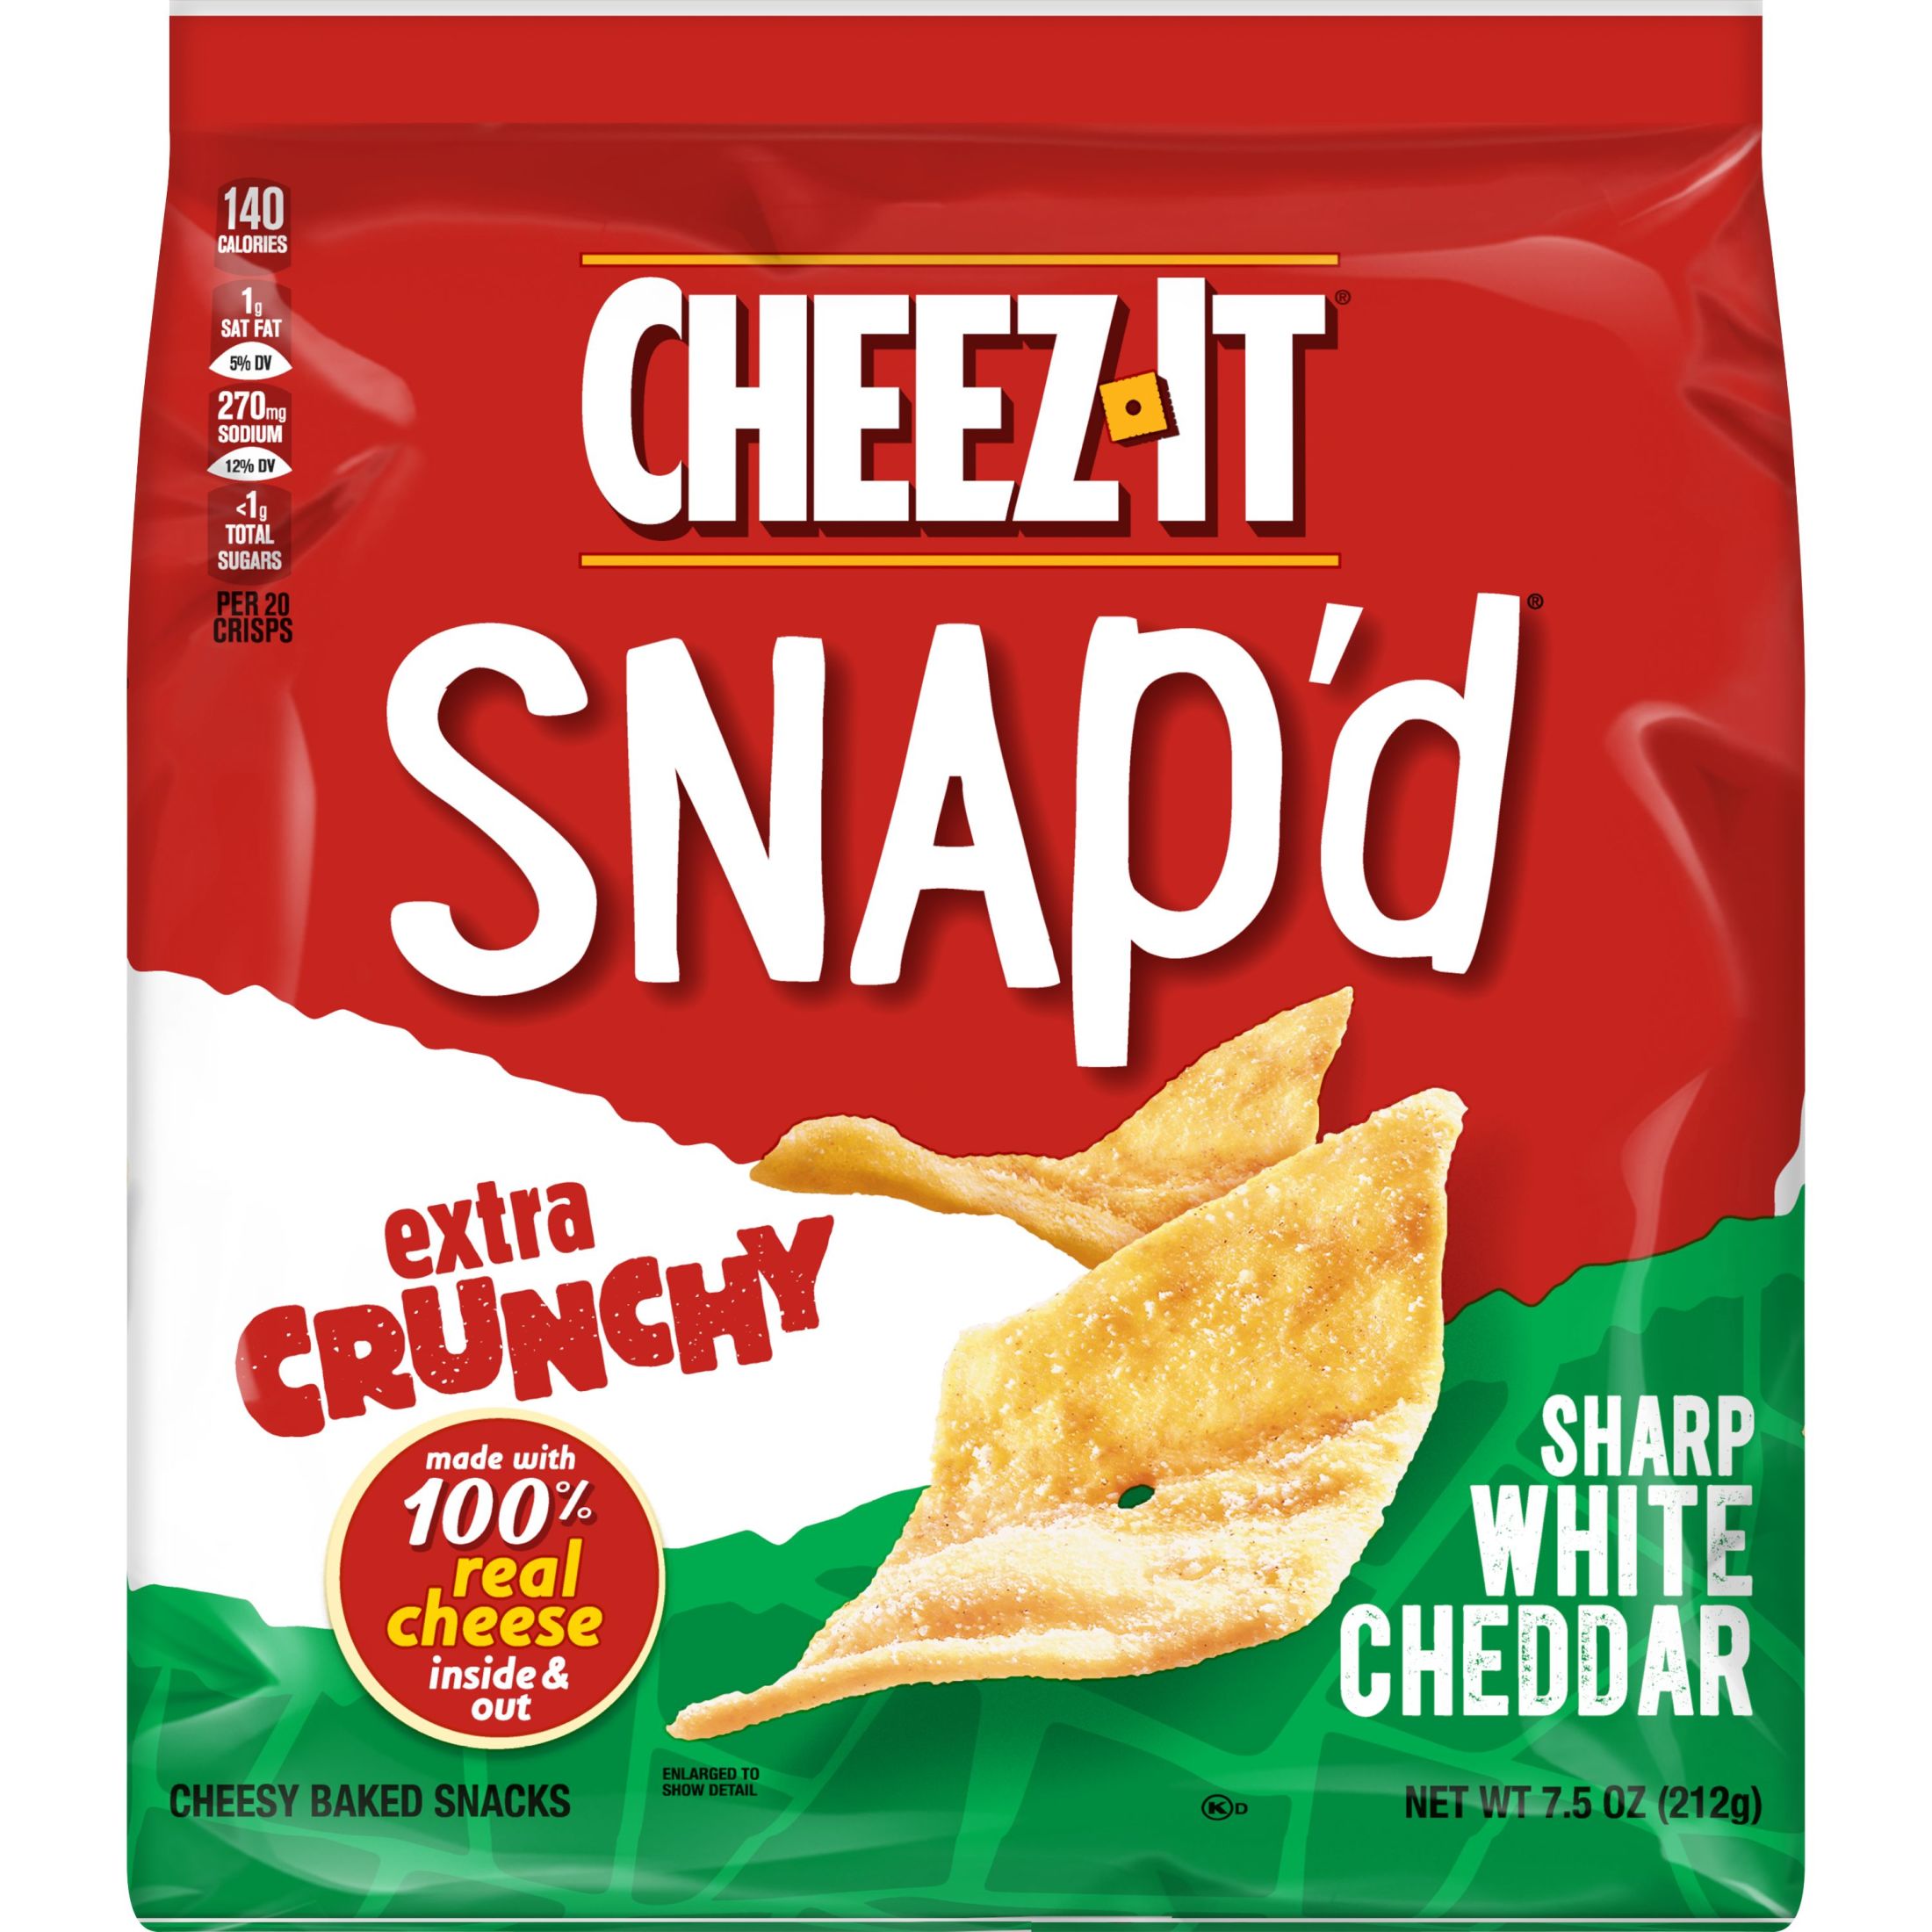 Cheez-It Snap'd Sharp White Cheddar Cheese Cracker Chips, Thin Crisps, 7.5 oz - image 5 of 8